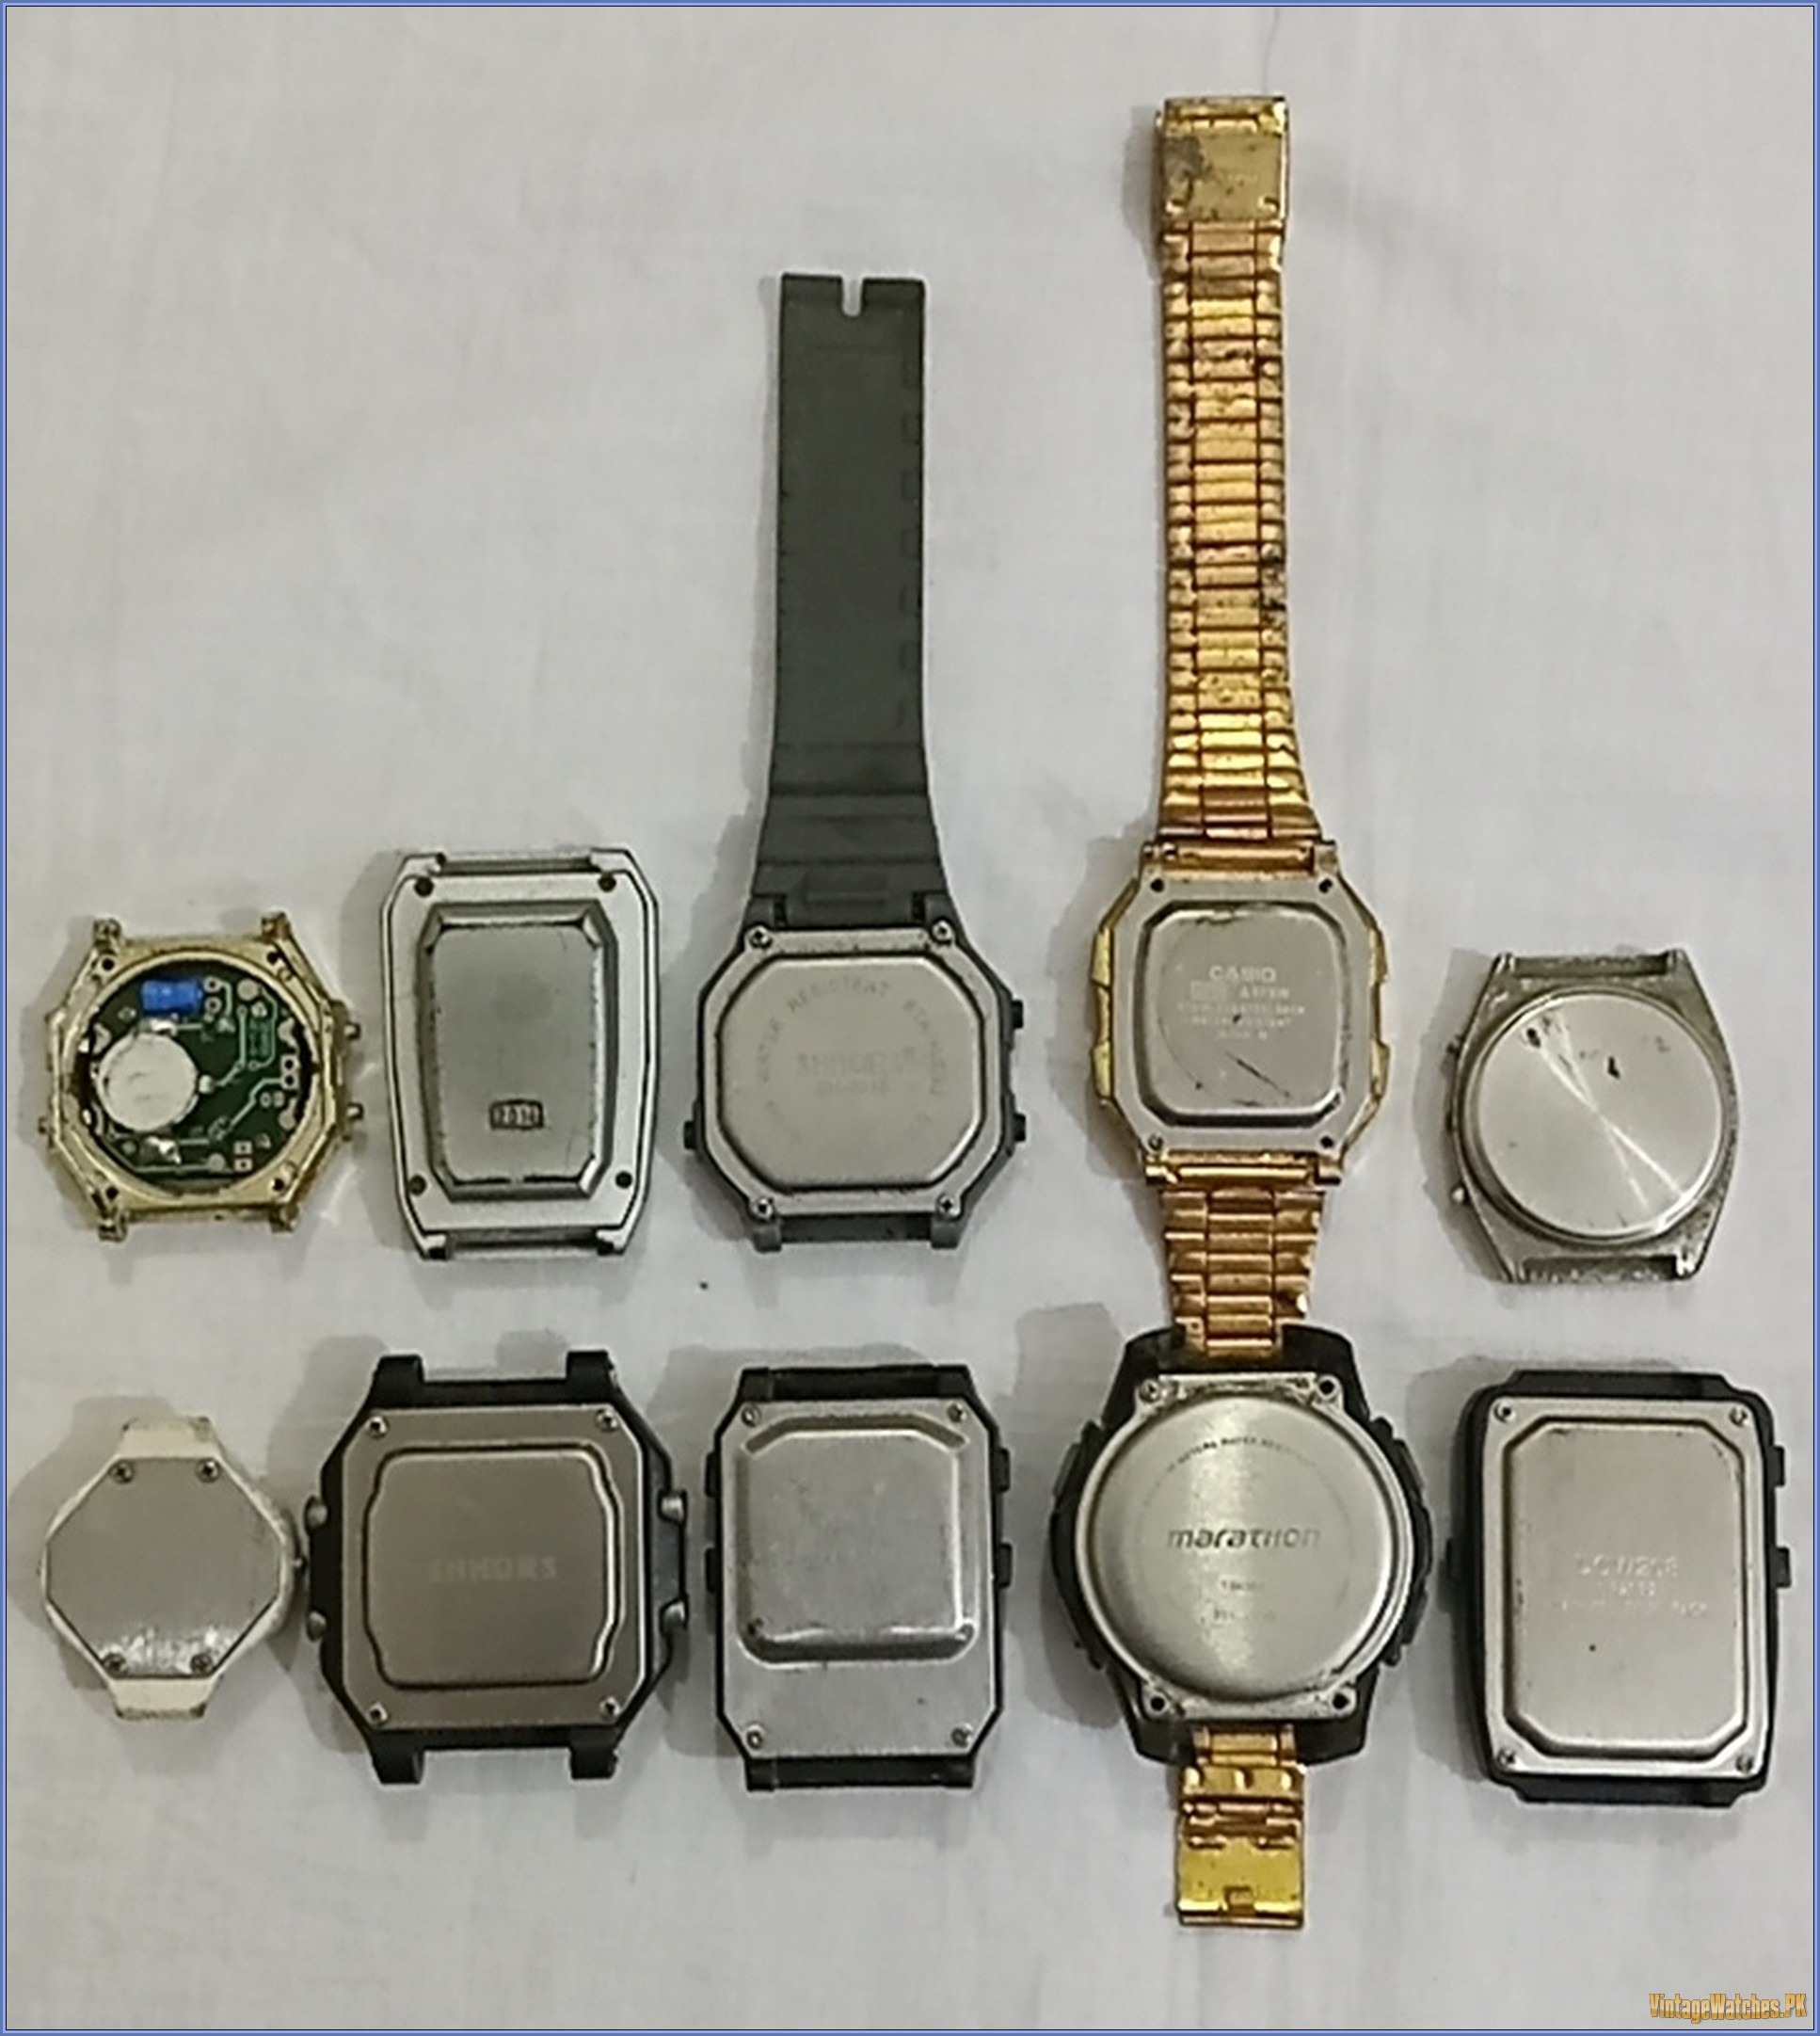 Lot of 10 Vintage Antique Digital LCD Calculator Watches Clocks China - PK00013-IMG_20221020_191309_3 - VintageWatches.PK